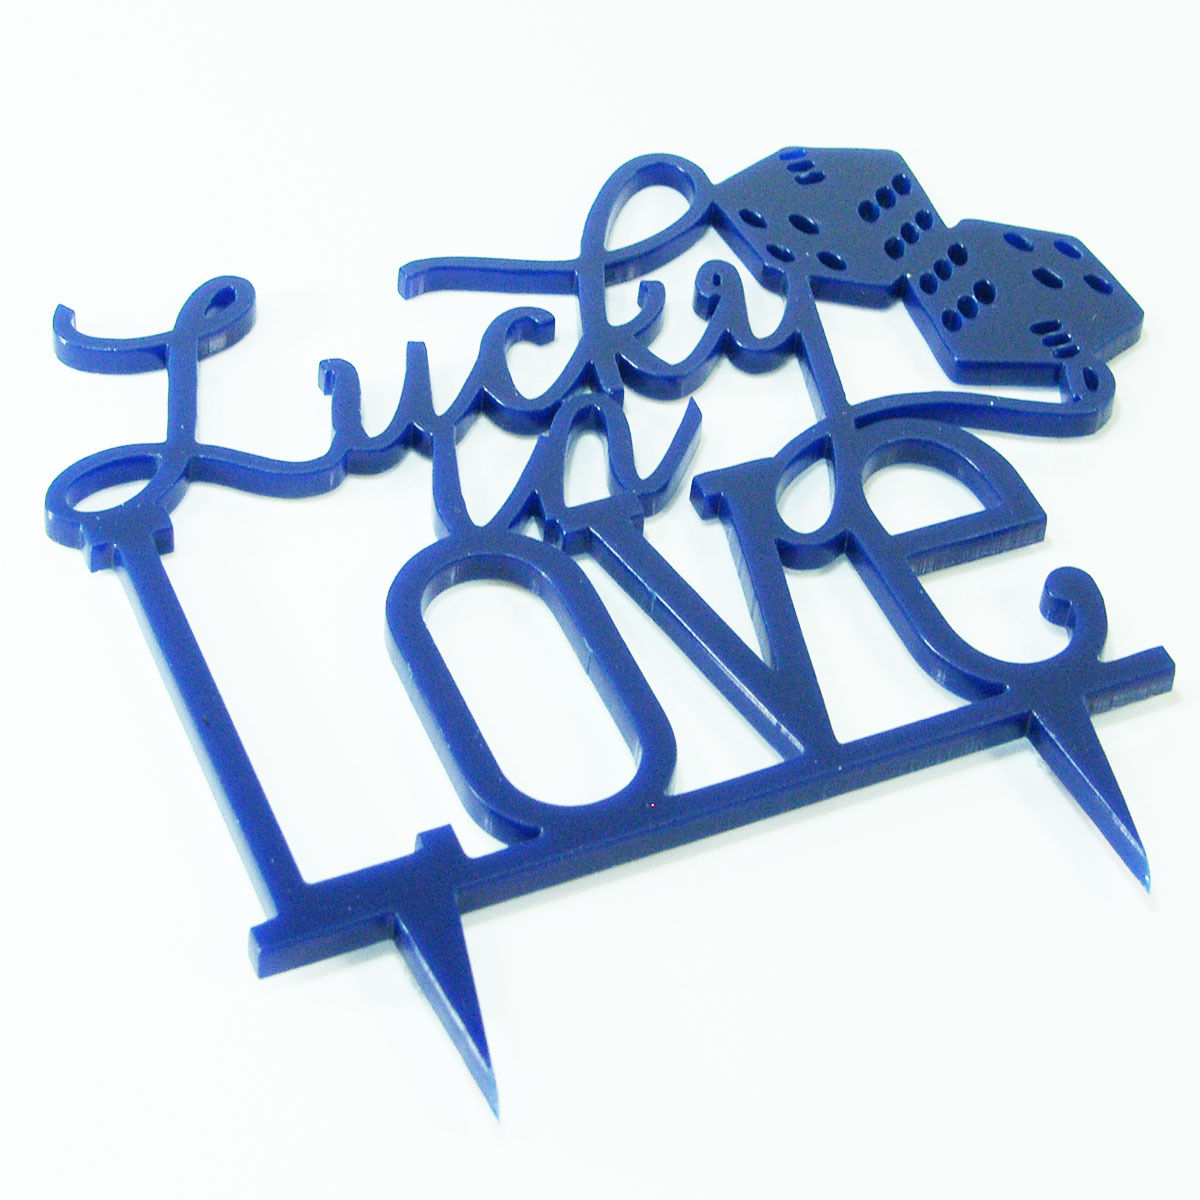 Lucky Love Proposal Wedding Engagment Cake Decoration Topper Acrylic Silhouette